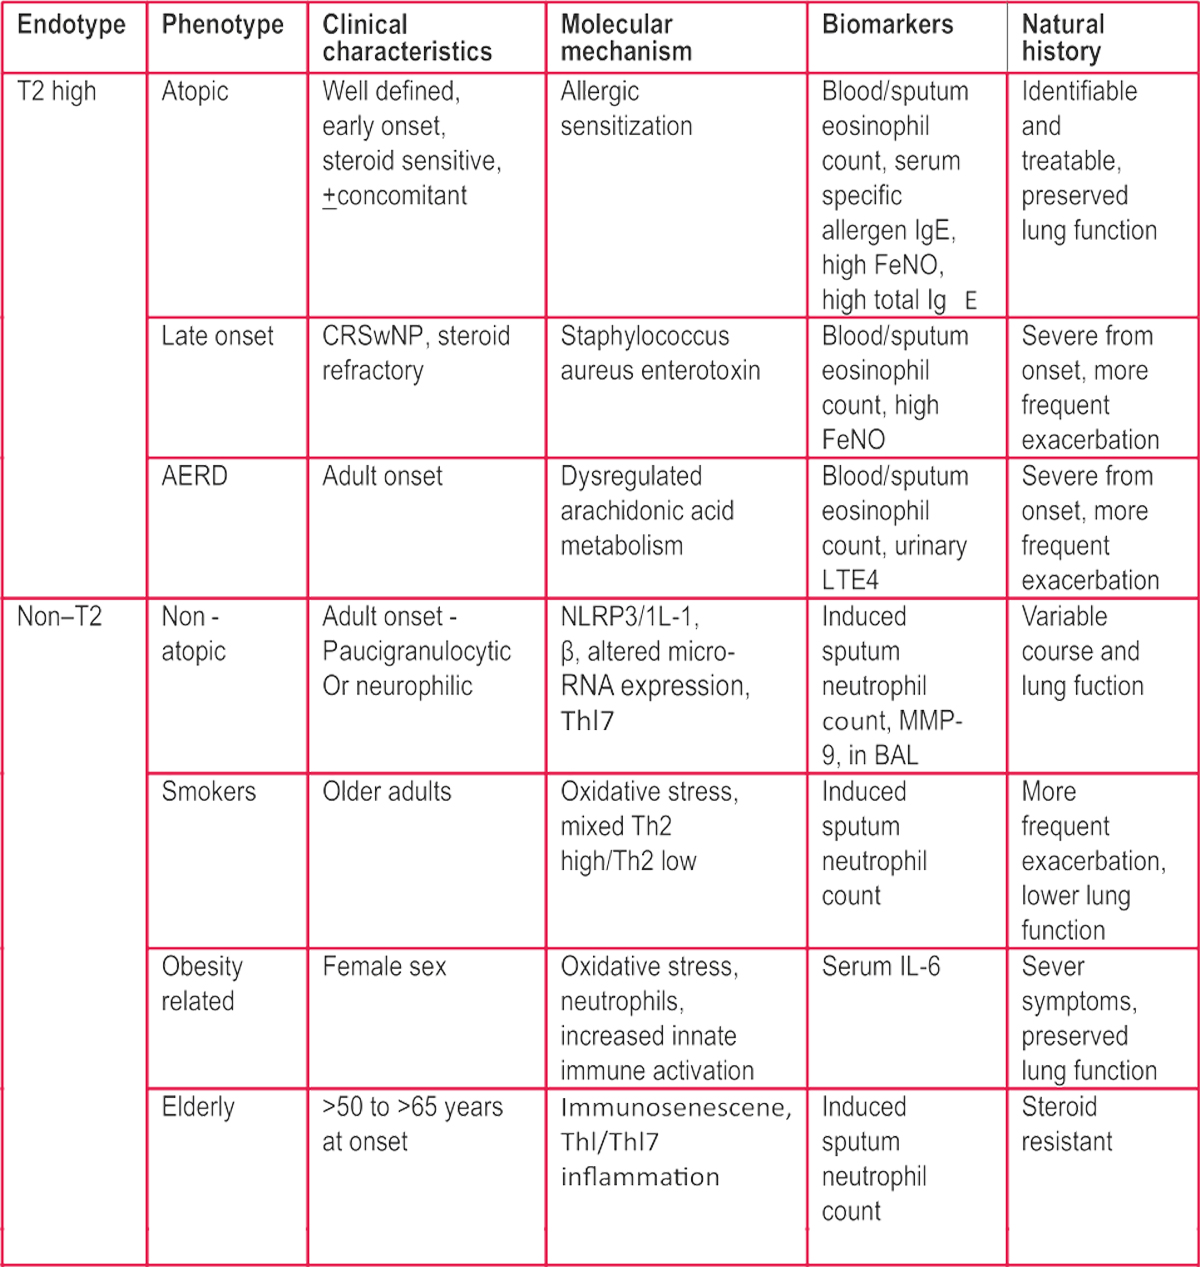 Endotypes and phenotypes of asthma